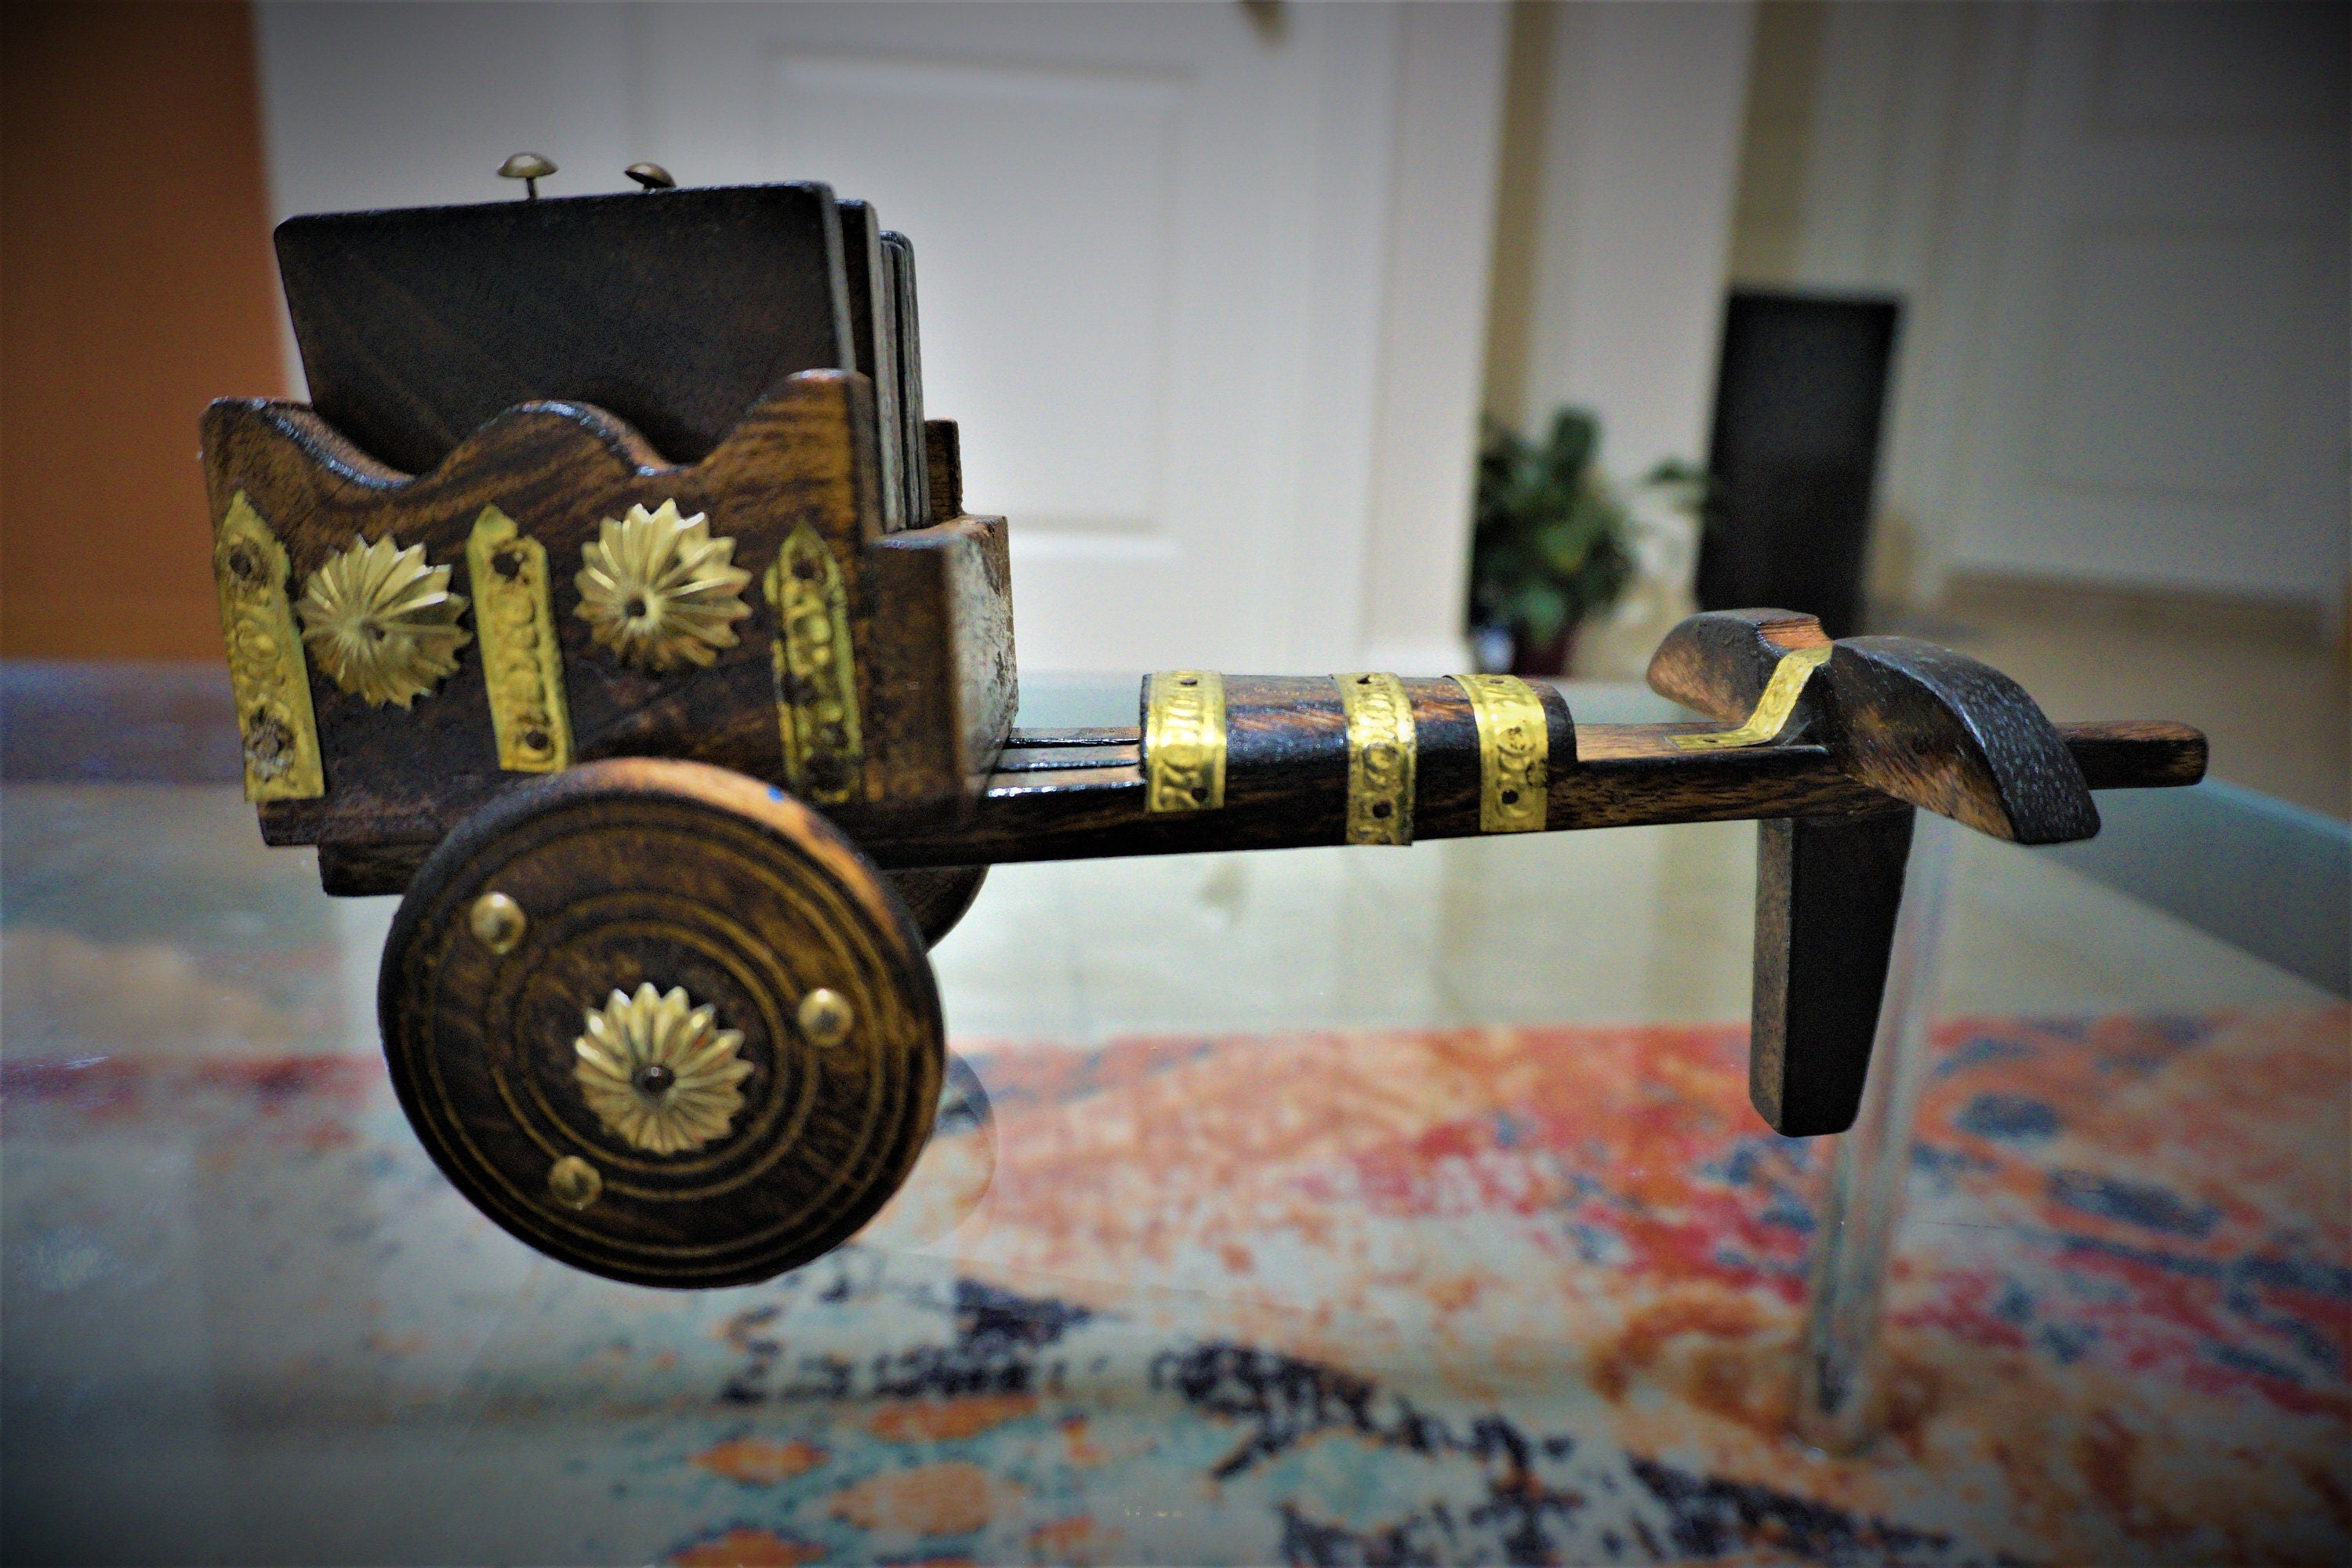 Wooden Handcrafted Mobile Bullok Cart Shaped Coasters (6 Pcs) with Gold color Metal Embedding